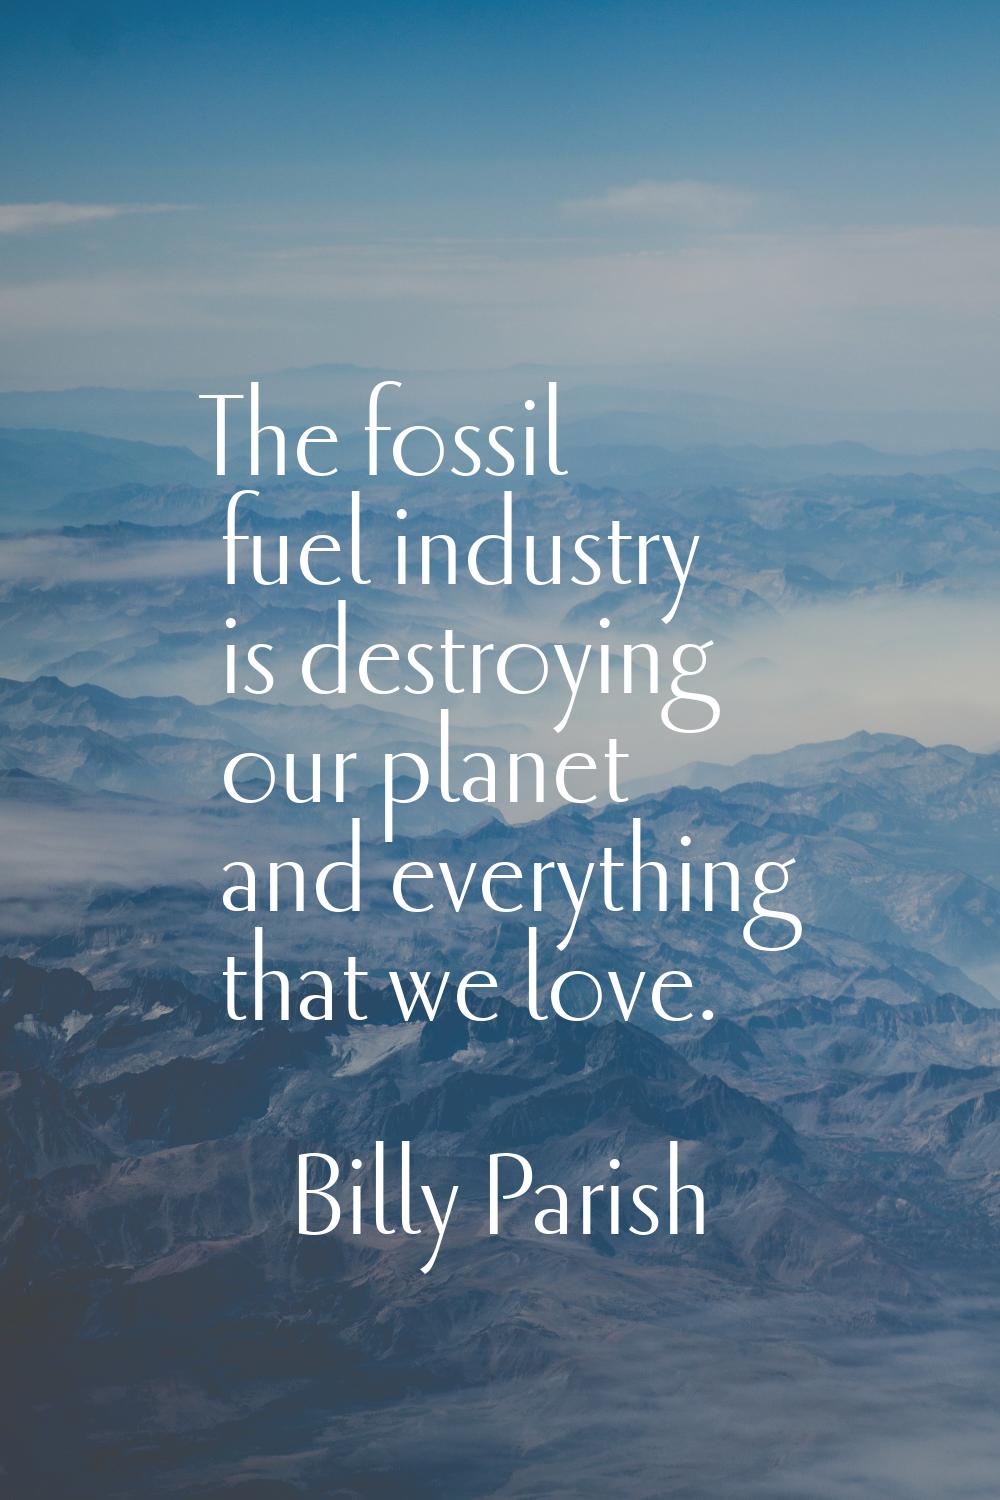 The fossil fuel industry is destroying our planet and everything that we love.